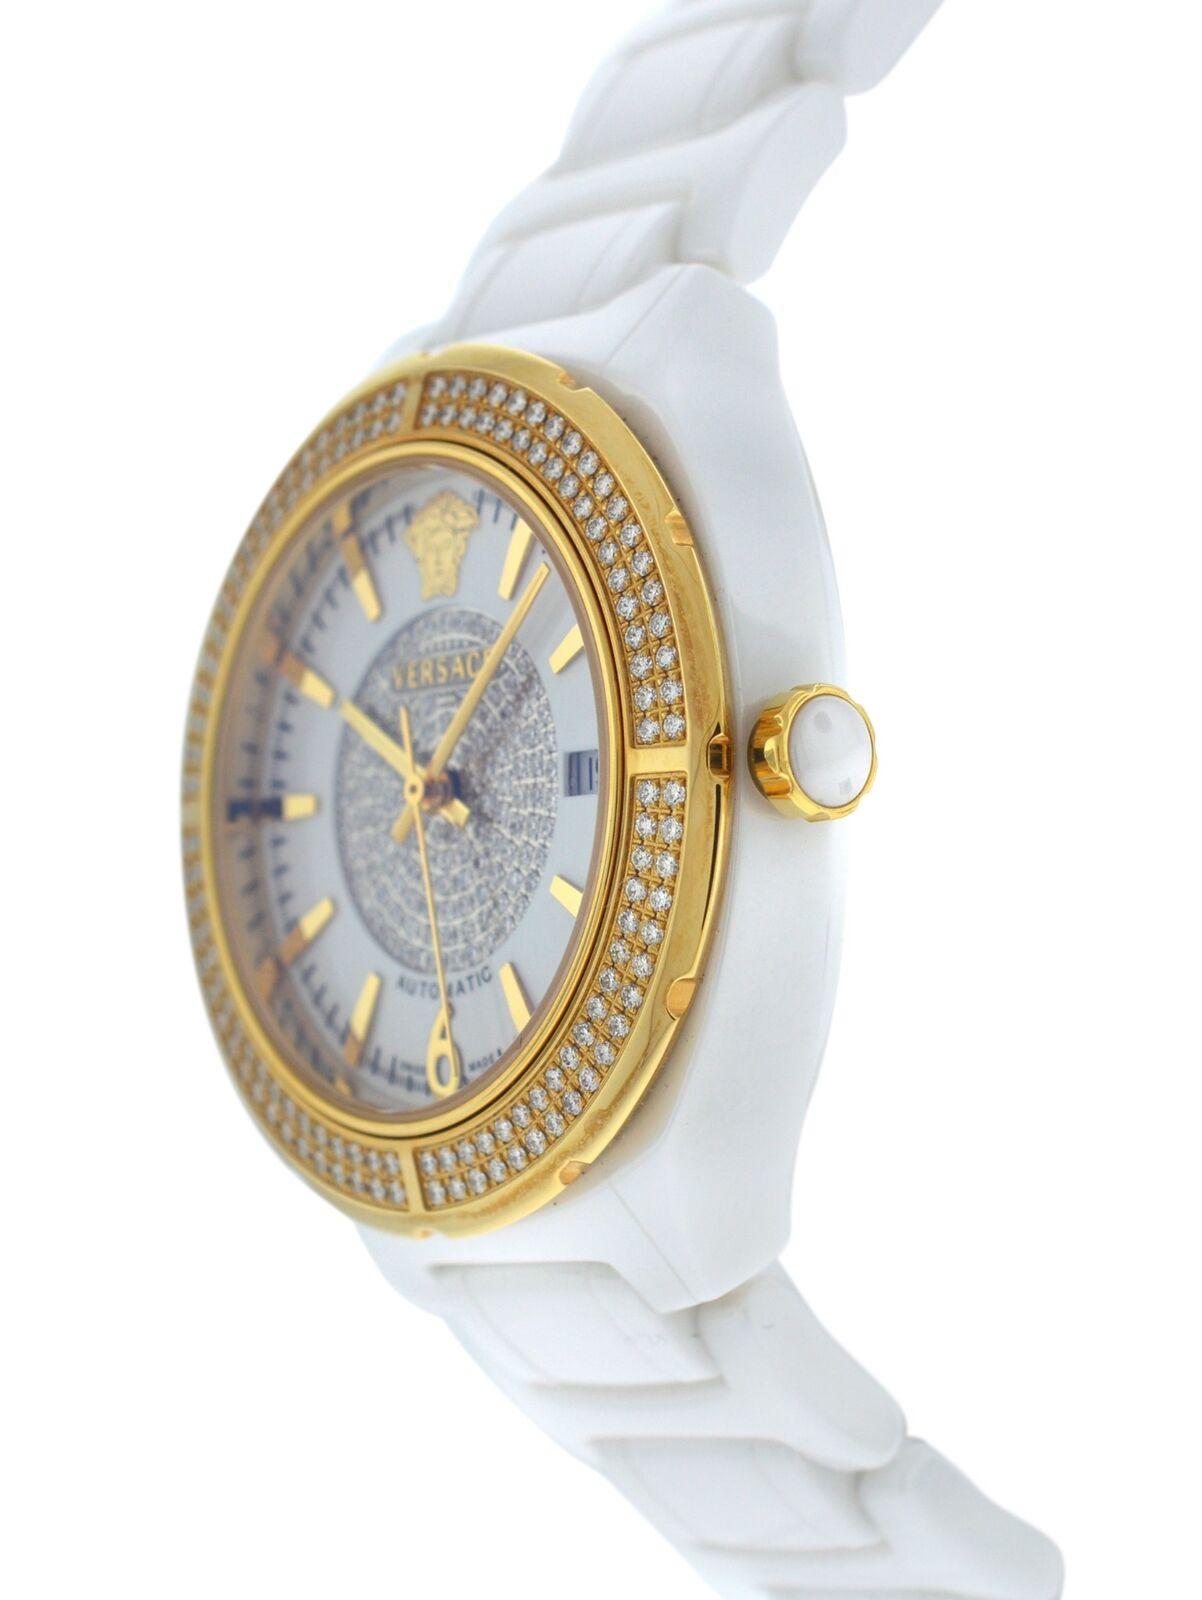 Brand	Versace
Model	 DV One 02ACP11D98F SC01
Gender	Ladies
Condition	New
Movement	Swiss Automatic
Case Material	Ceramic & steel
Bracelet / Strap Material	
Ceramic

Clasp / Buckle Material	
Stainless Steel

Clasp Type	Butterfly deployment
Bracelet /